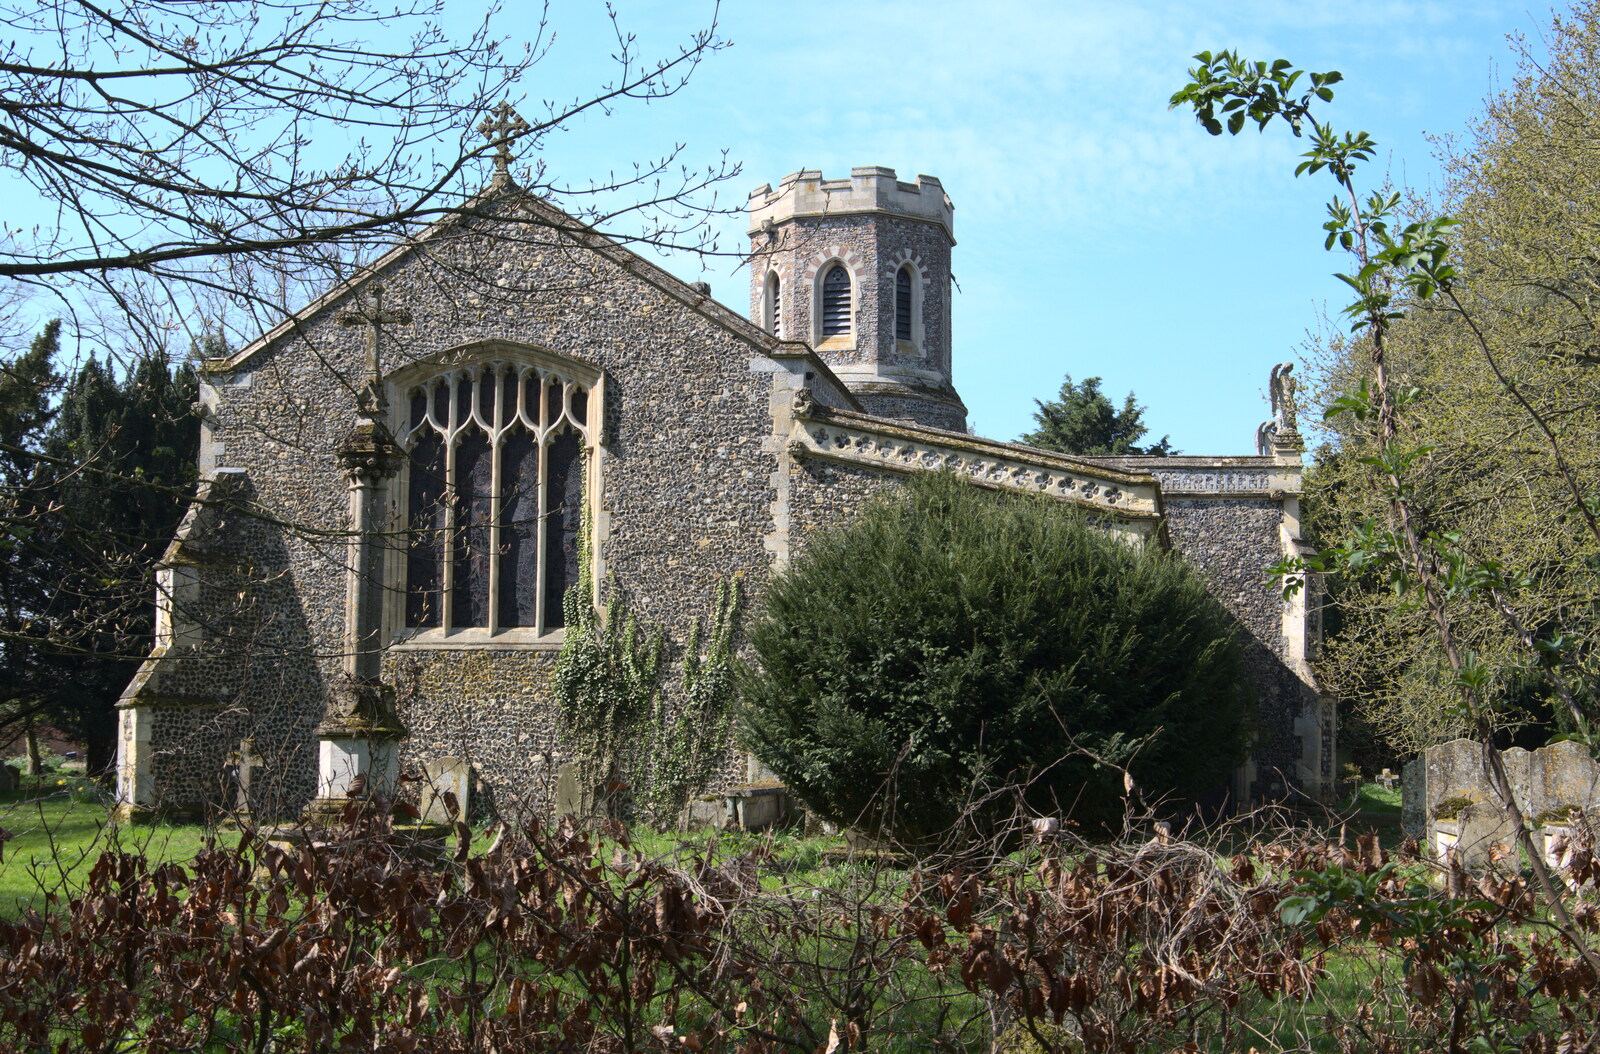 Brome church of St. Mary from A Weekend Camping Trip in the Garden, Brome, Suffolk - 11th April 2020